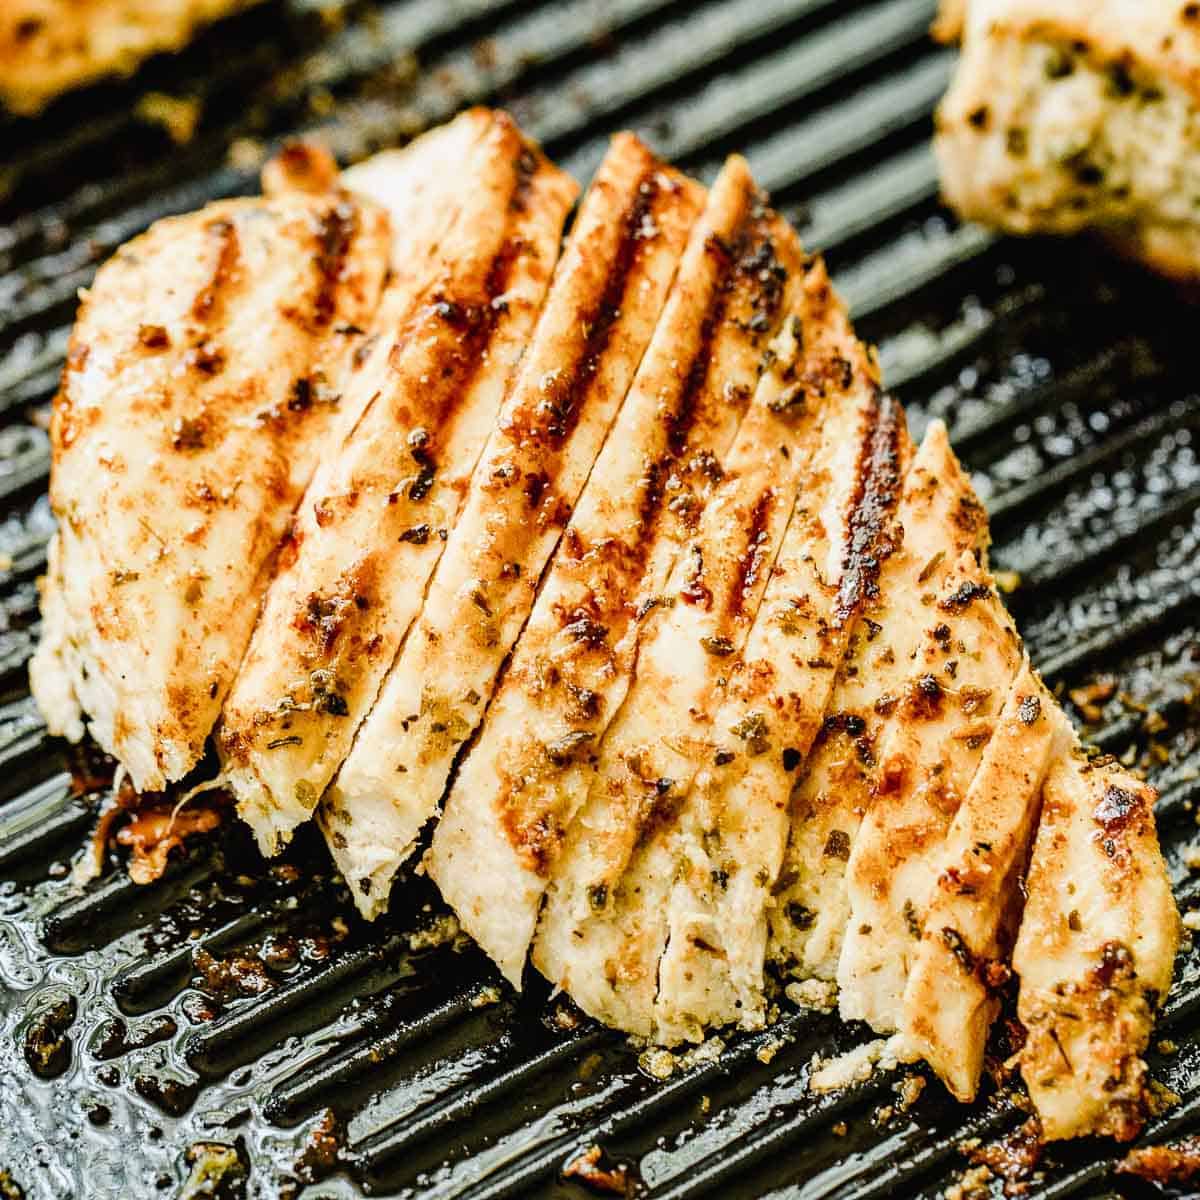 A sliced chicken breast on a grill pan.